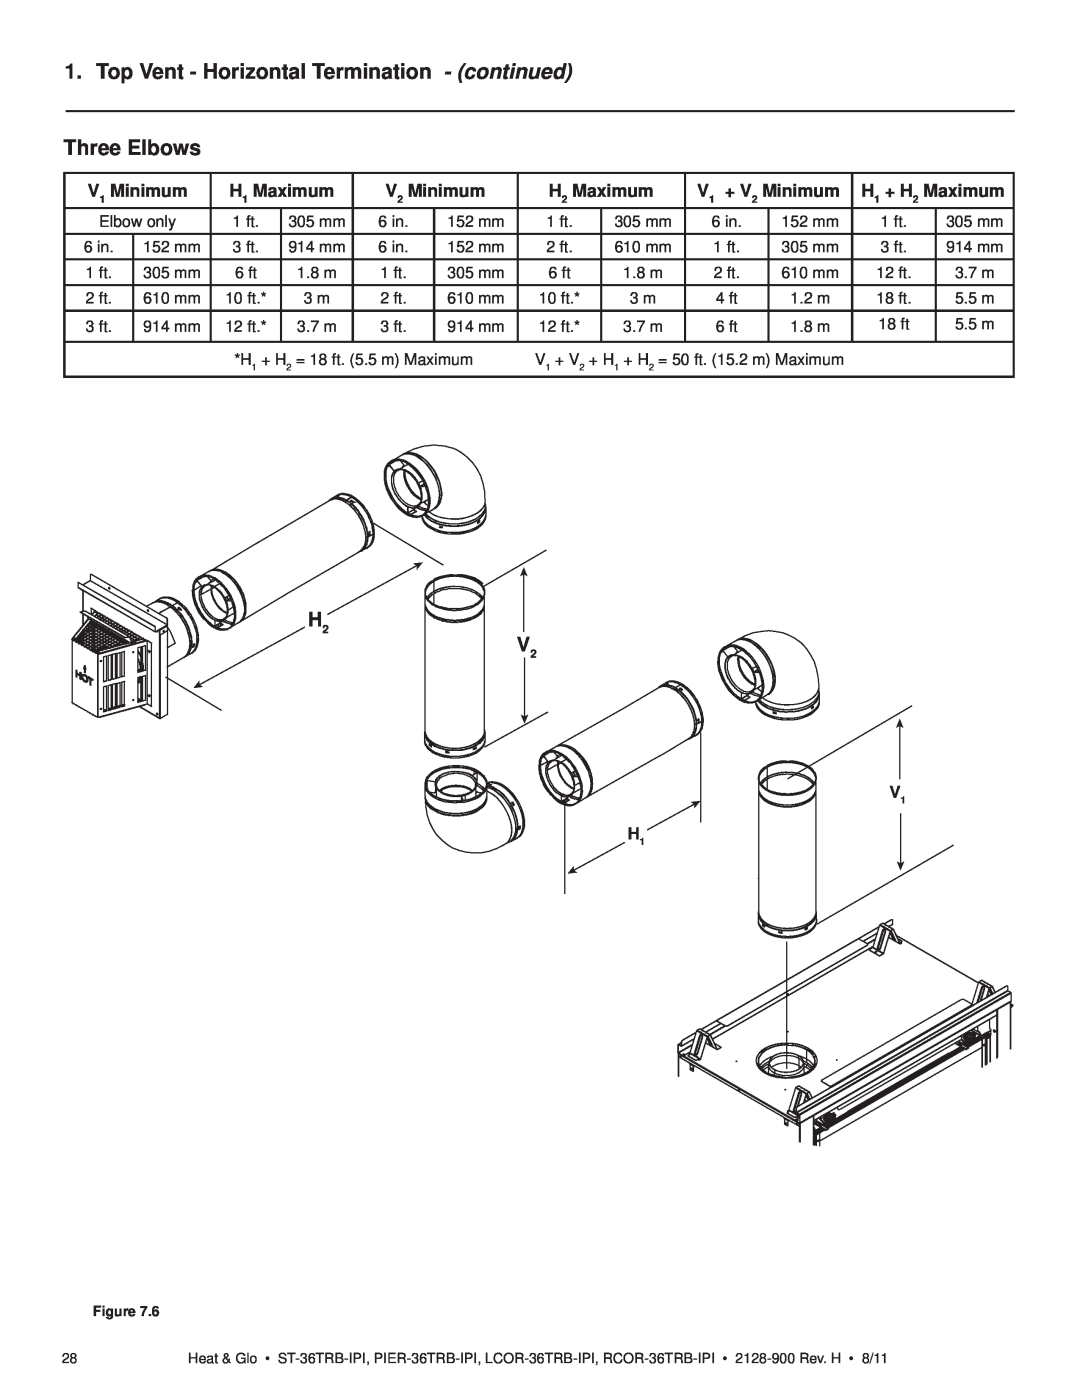 Heat & Glo LifeStyle ST-36TRB-IPI owner manual Top Vent - Horizontal Termination, Three Elbows, continued, H2 V2 